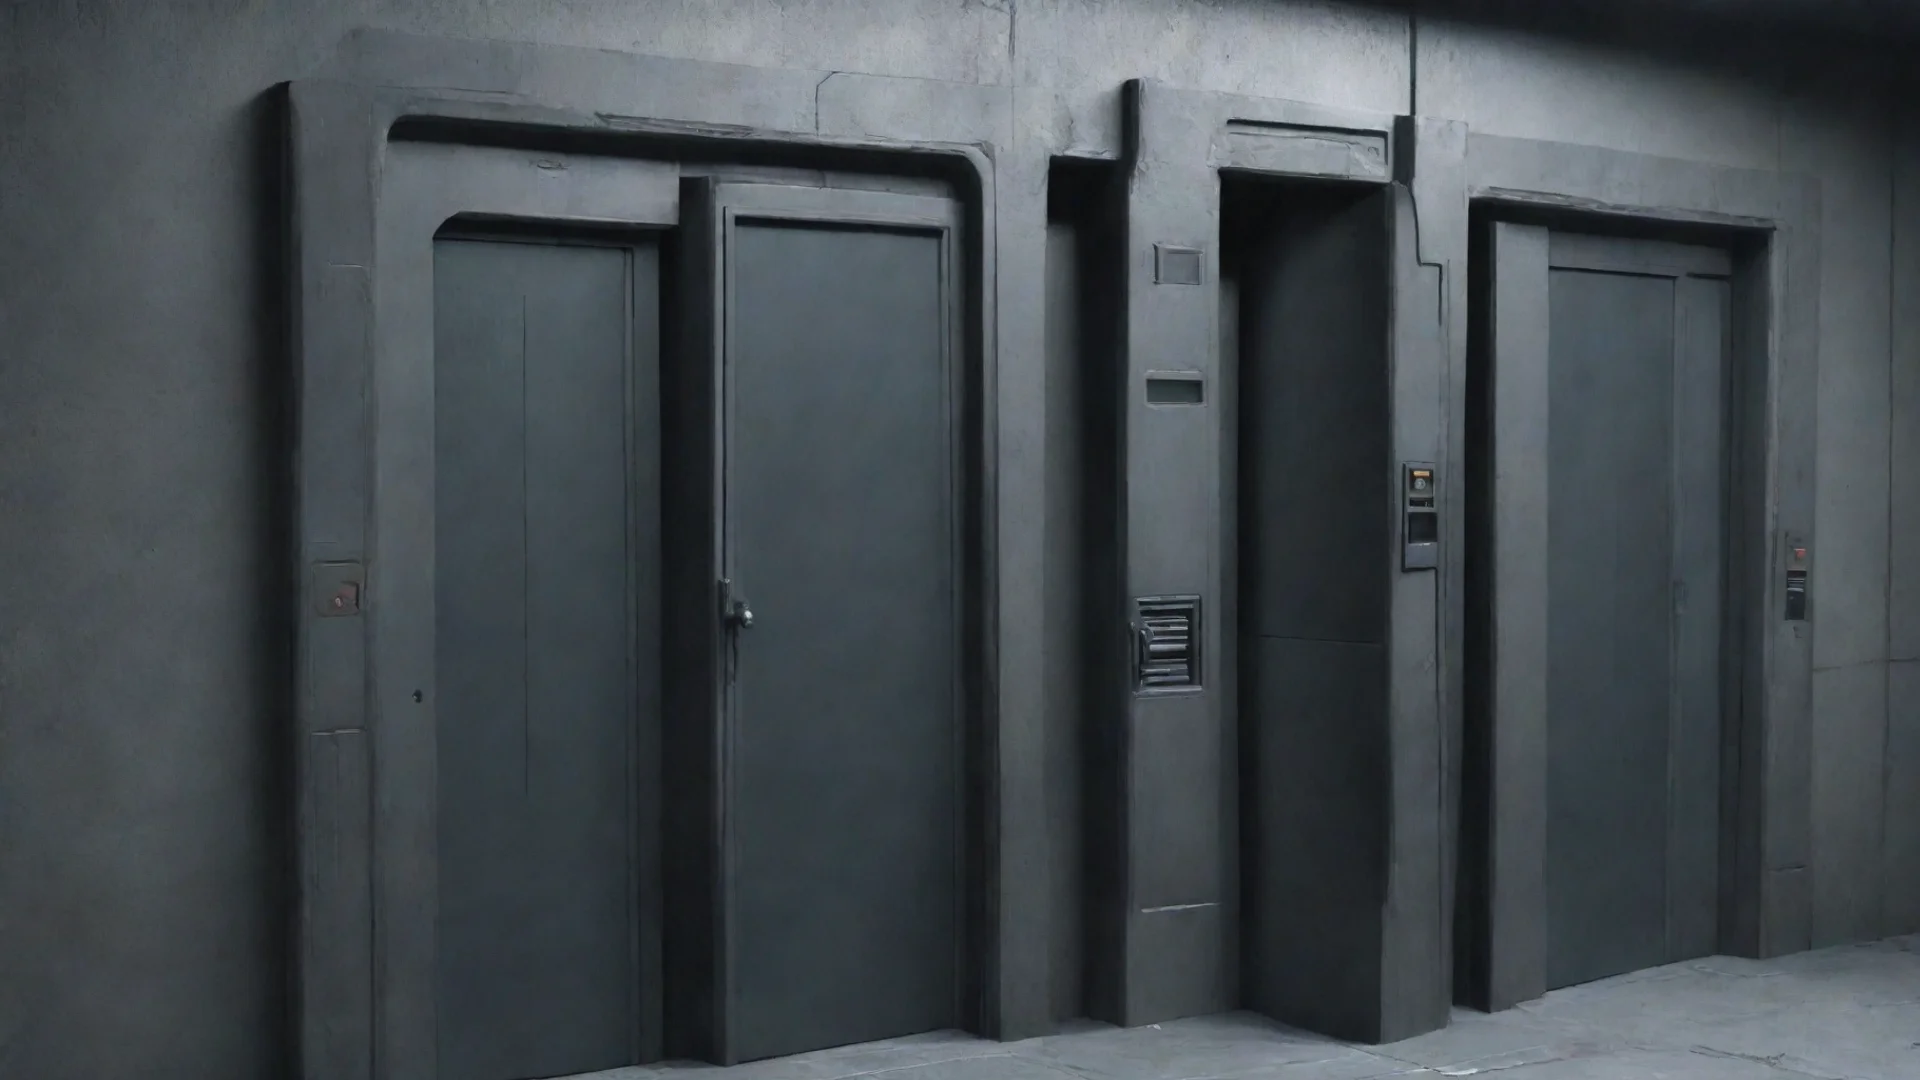 aiamazing sci fi wall with doors awesome portrait 2 wide